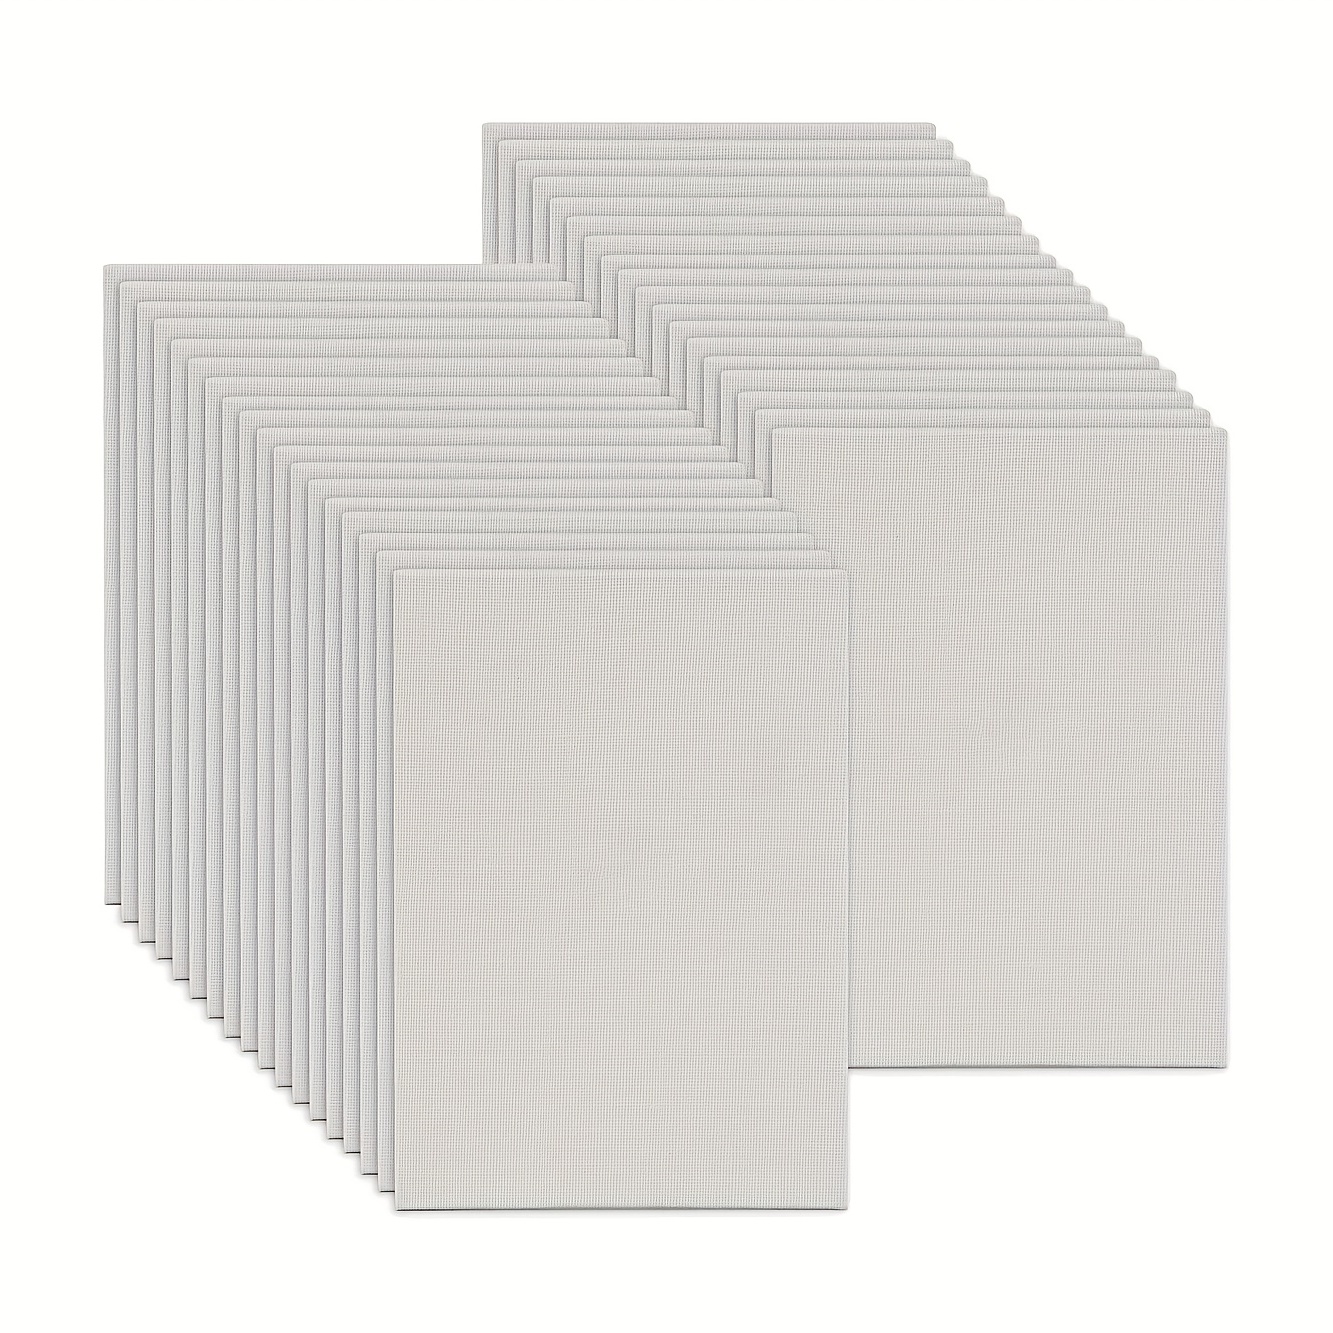 CONDA Mini Stretched Canvas for Painting, 4x4 inch 12 Pack of Art Small  Canvases for Kids Artists,100% Cotton Primed Blank Canvas, 5/8 Inch Profile